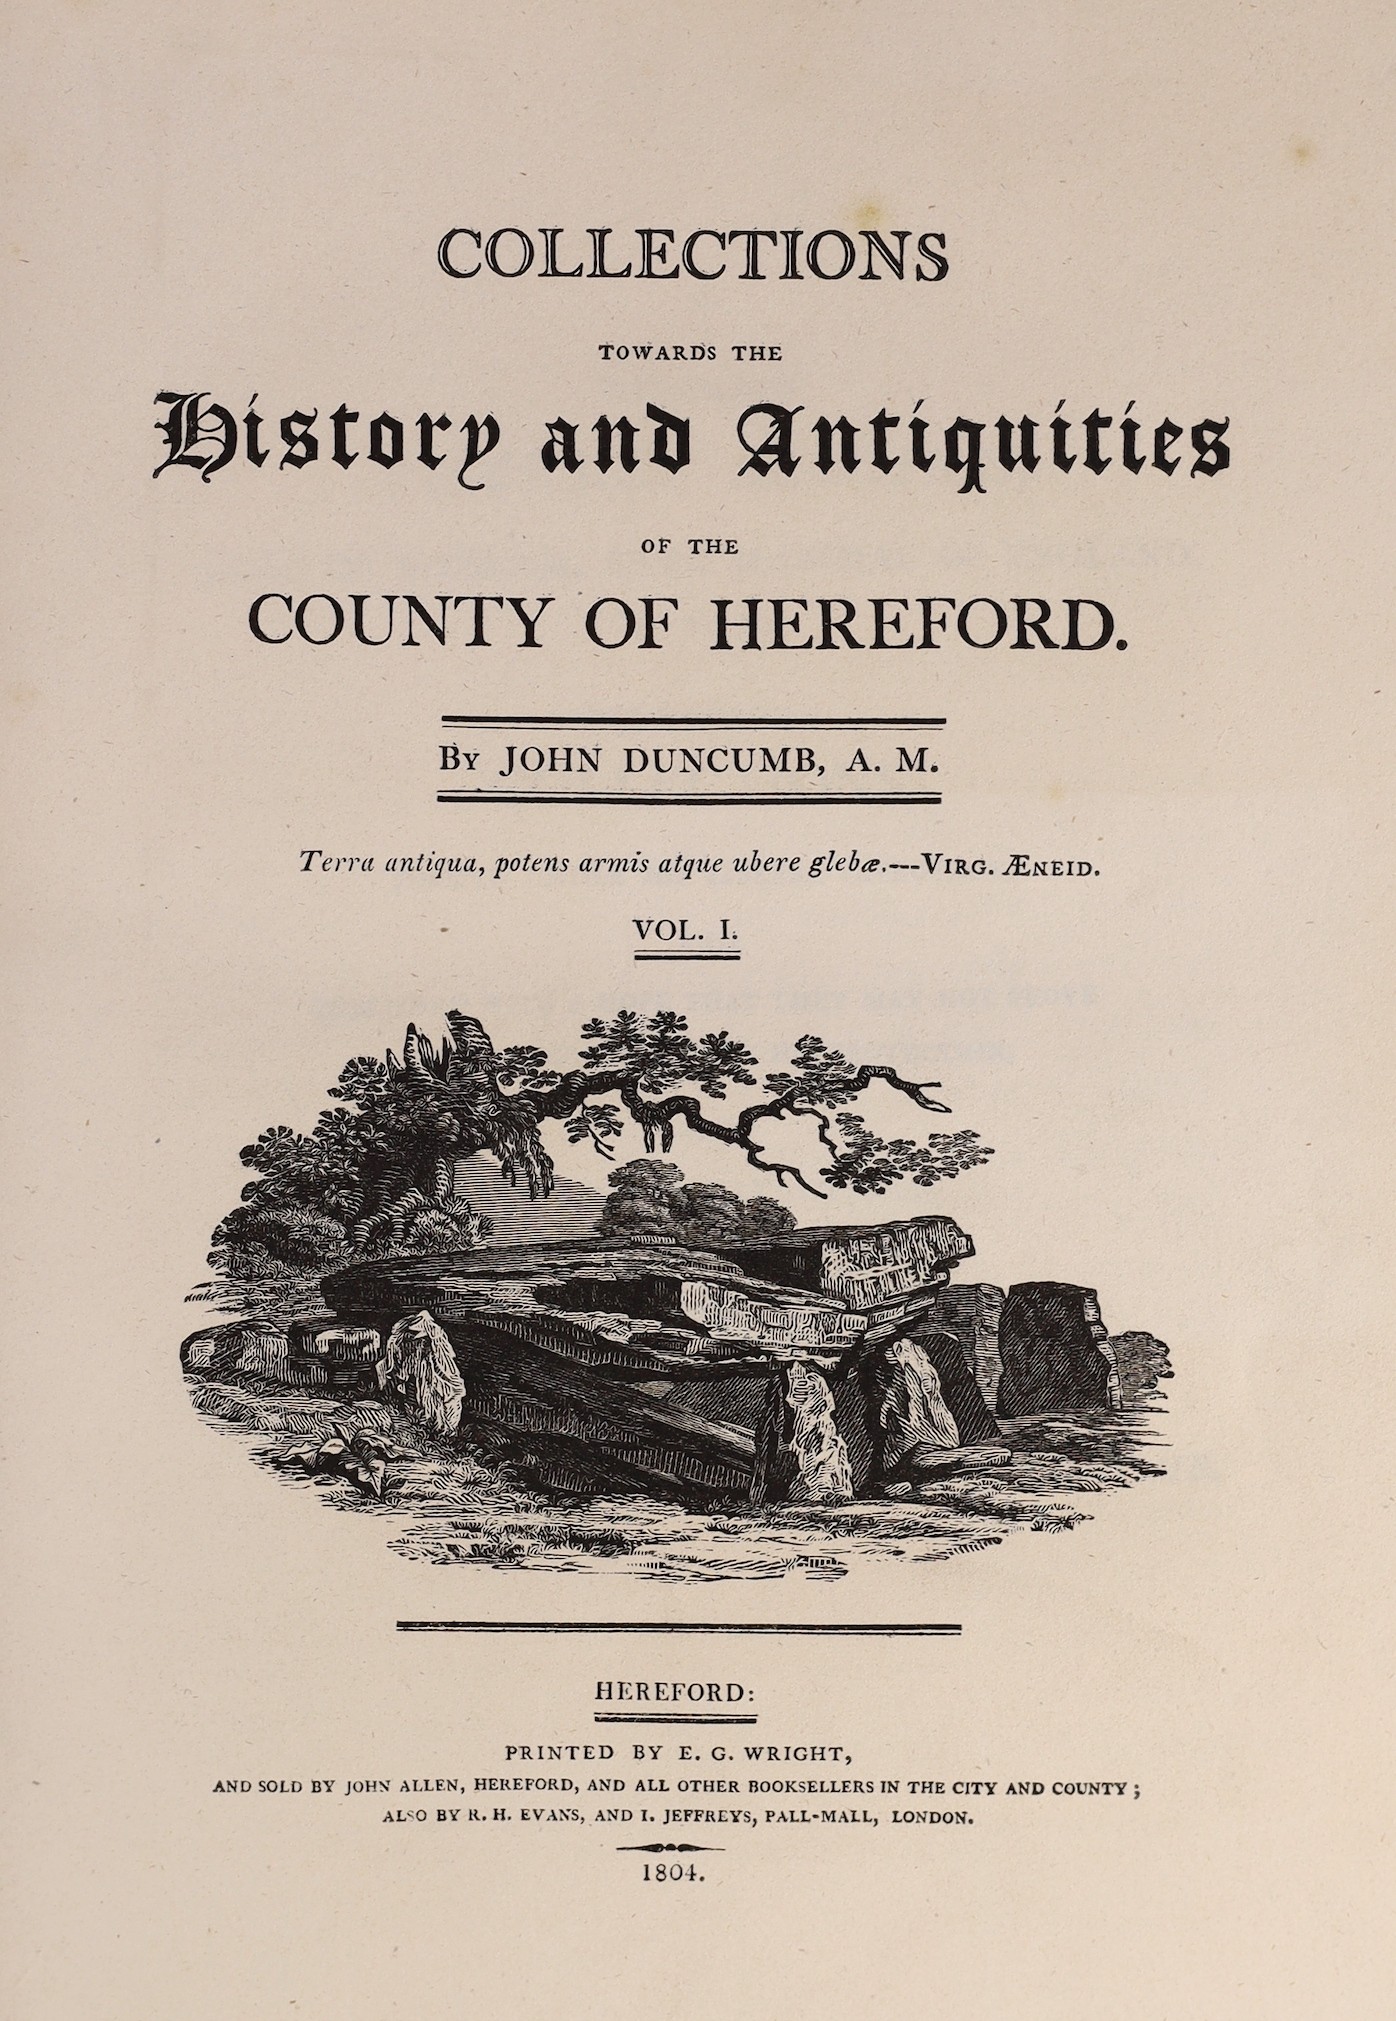 HEREFORD - Duncumb, John - Collections towards the History and Antiquities of the County of Hereford. 2 vols. pictorial title vignettes, county map and 4 others, 2 plans (1d-page), 7 plates and 2 portraits, with text eng